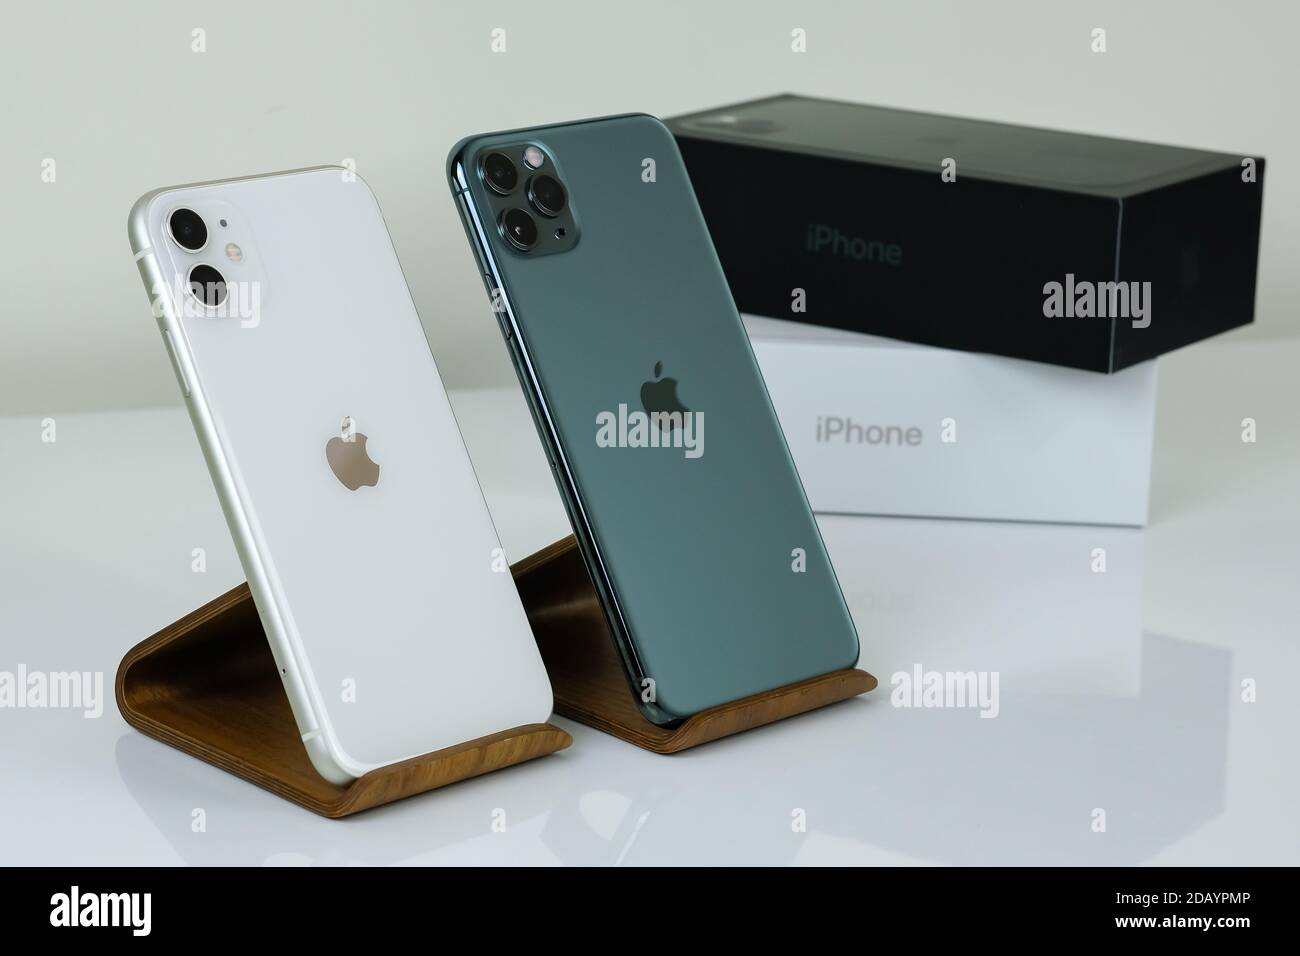 iPhone 11 Pro Max in midnight green next to iPhone 11 in white